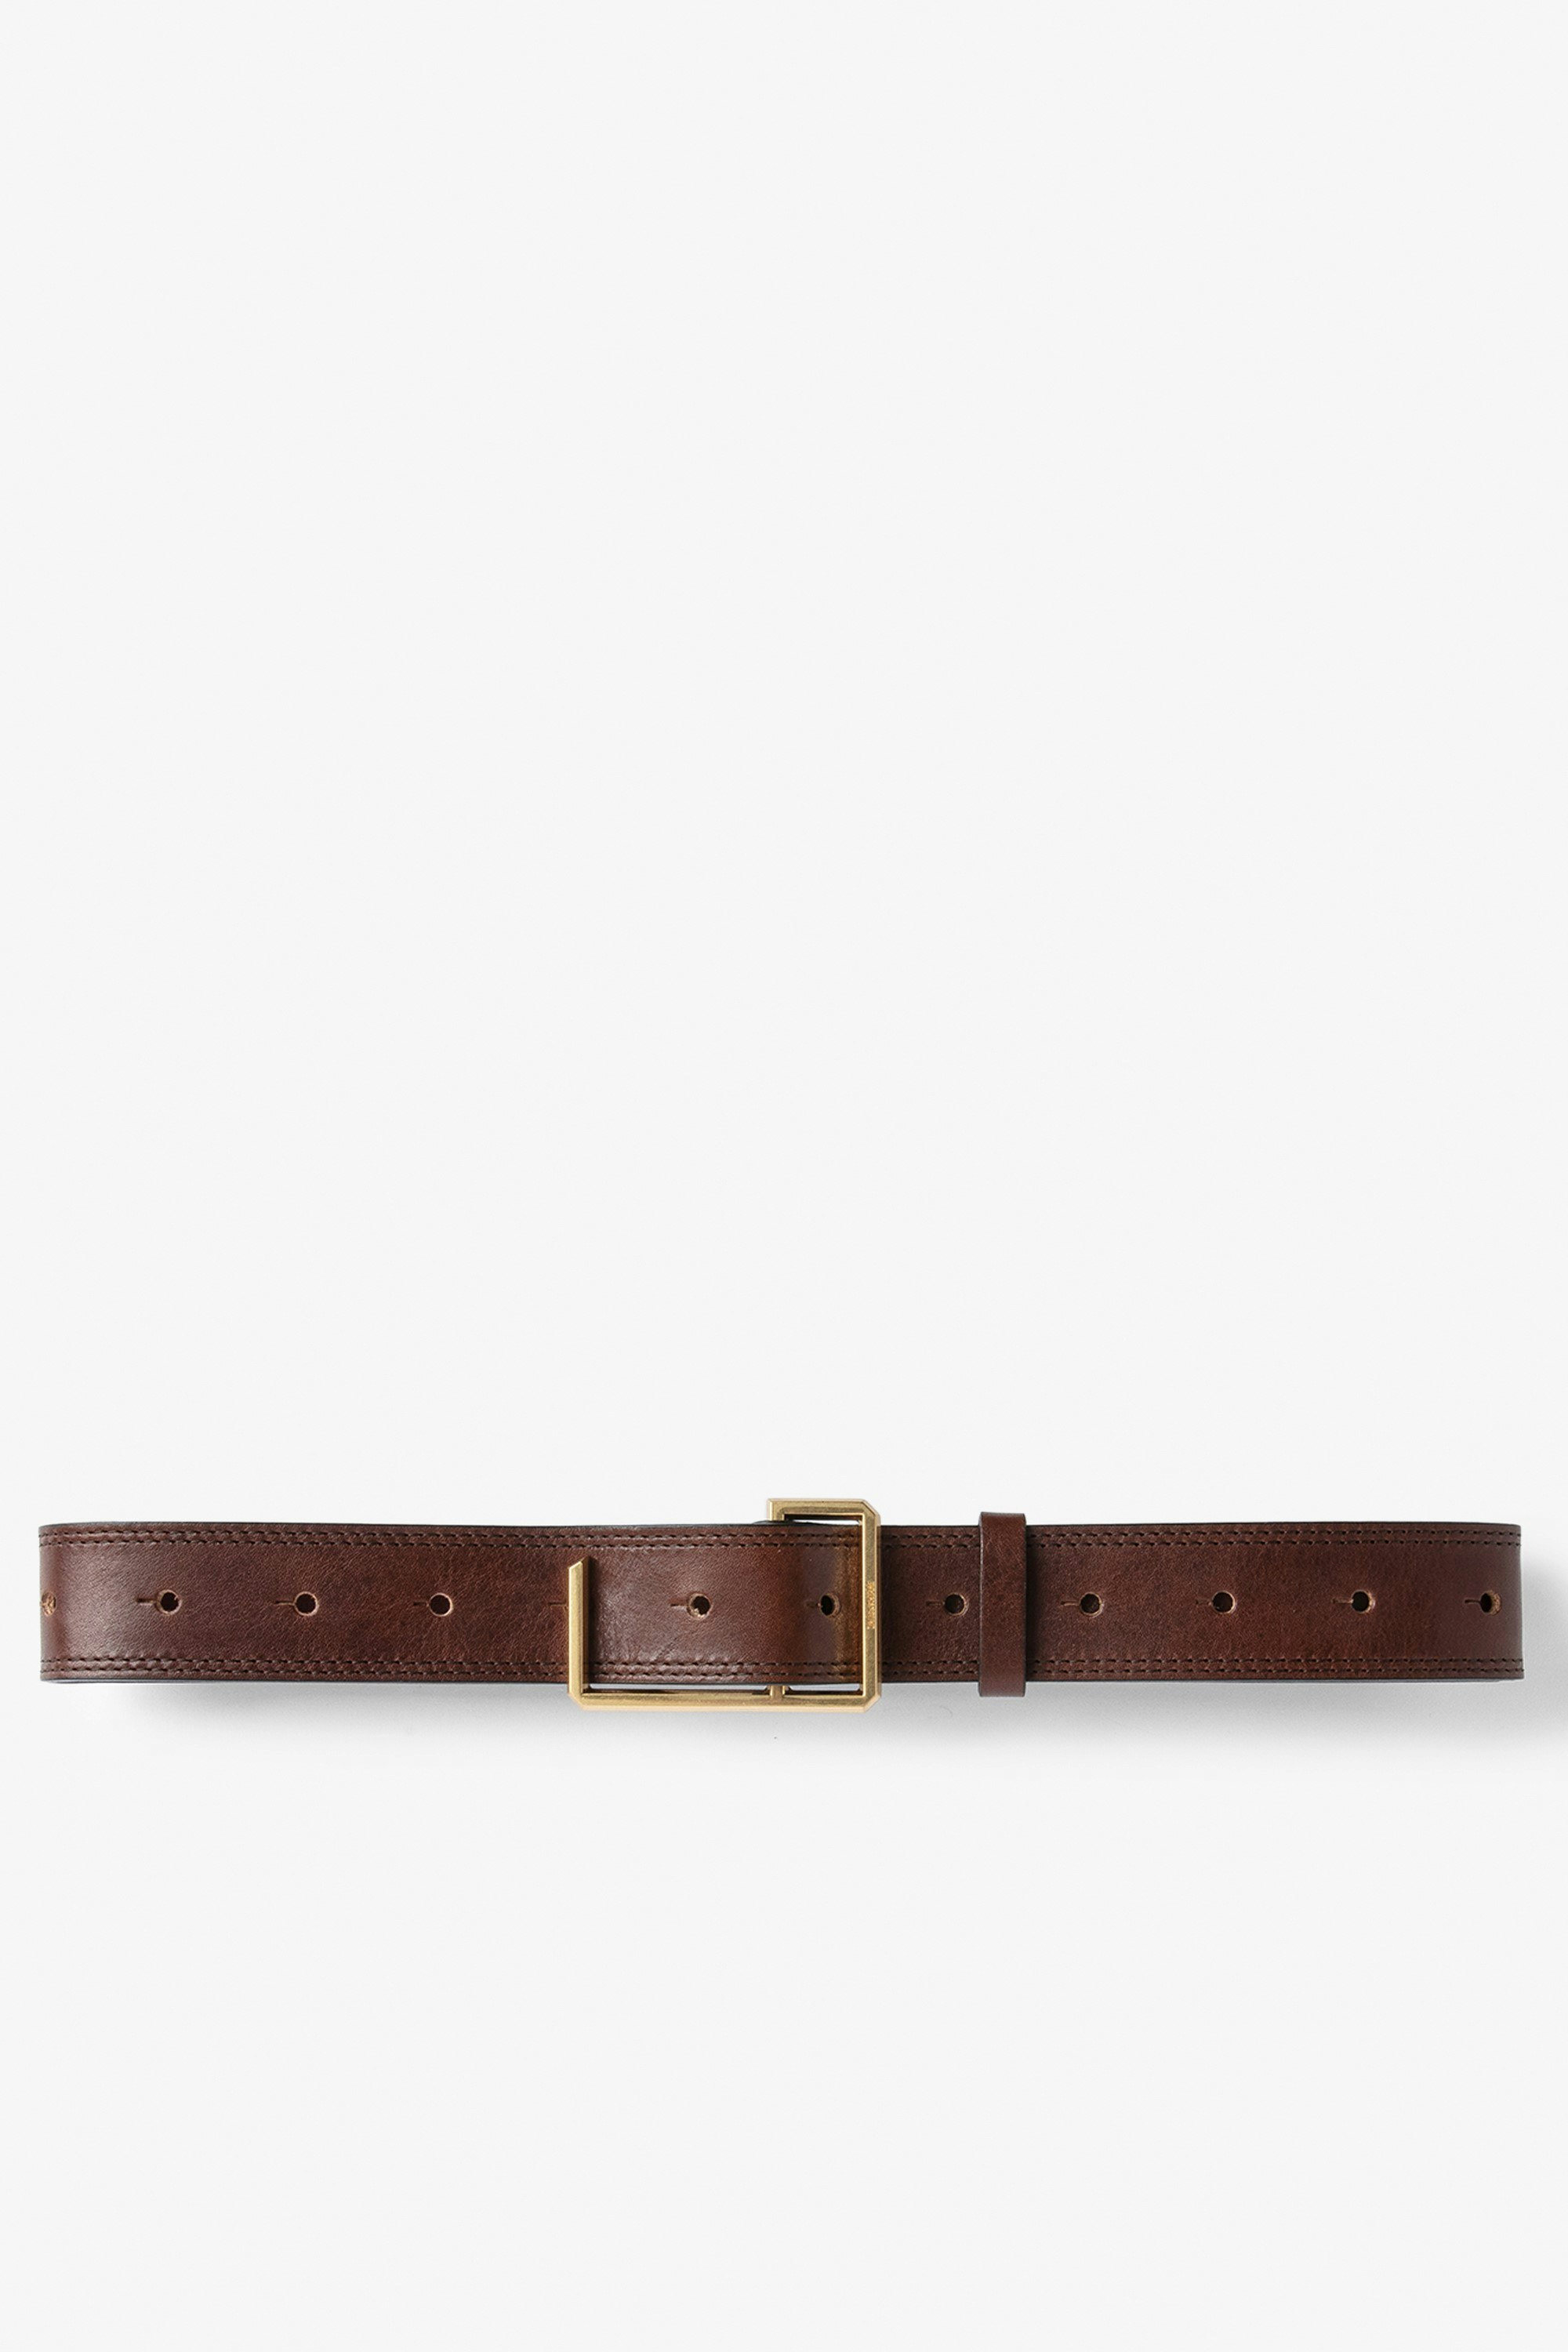 La Cecilia Belt - Women's belt in brown leather with gold-tone C buckle.